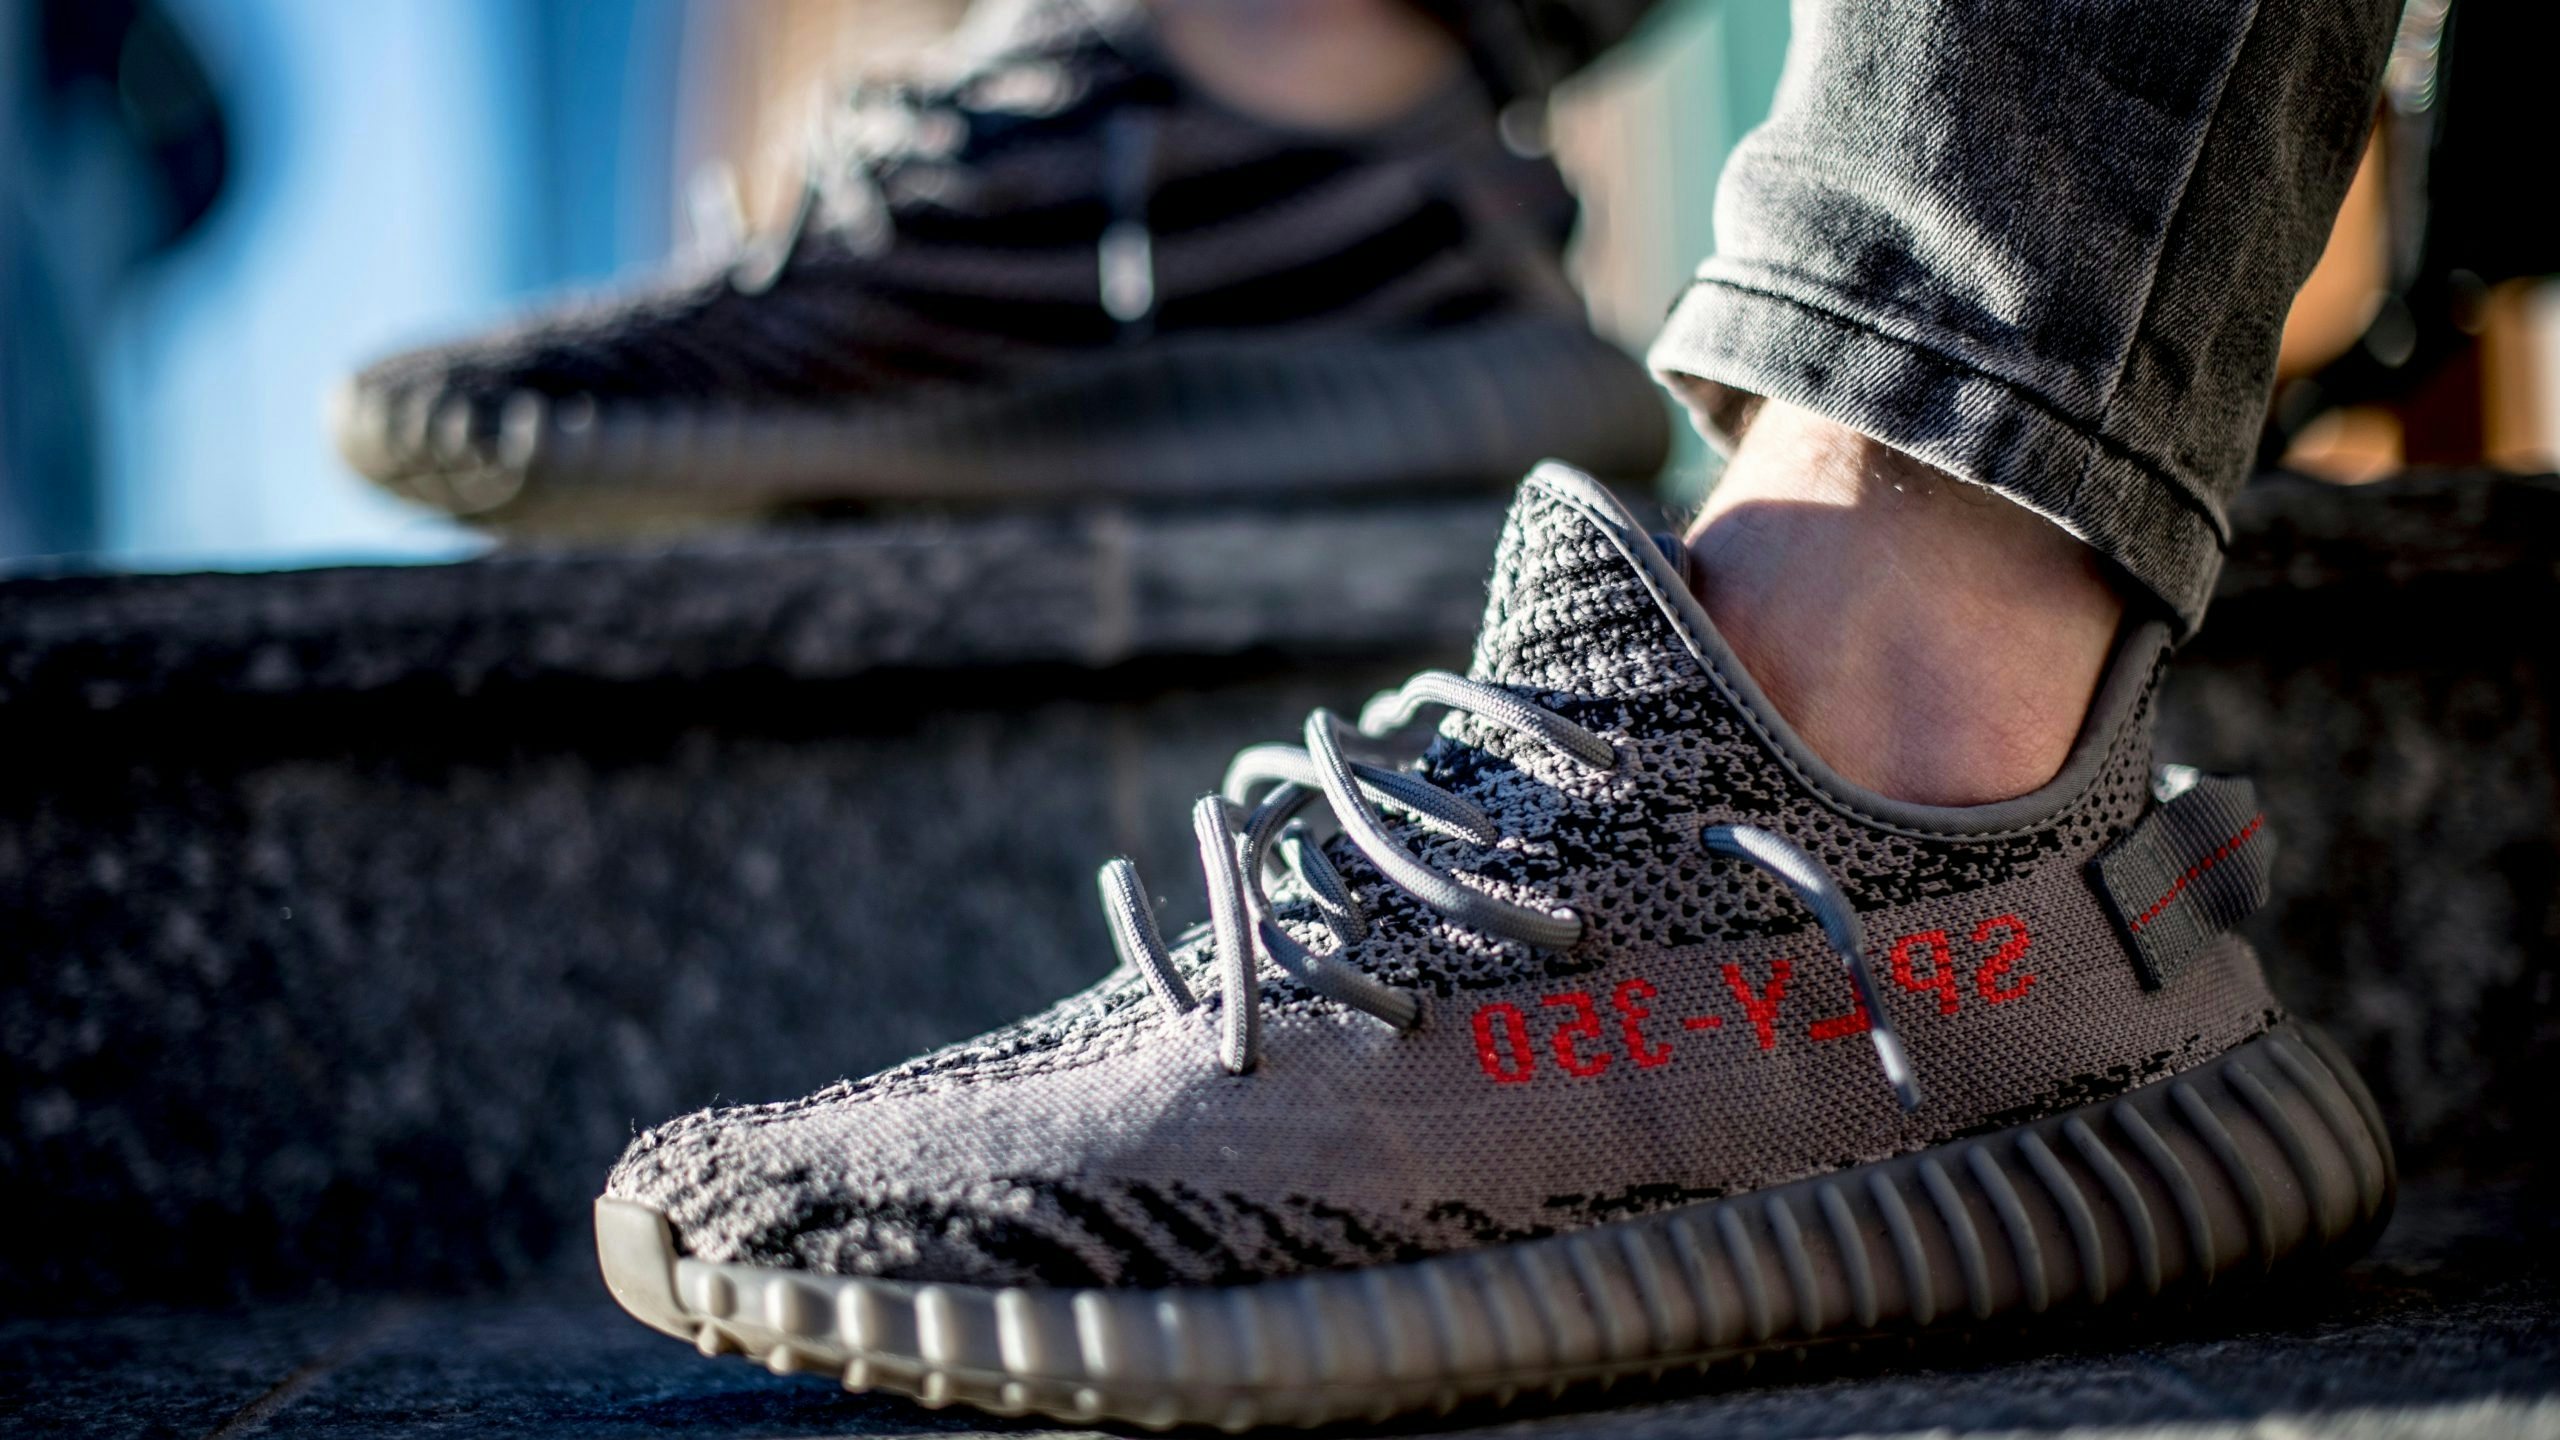 When we see the events around Kayne West, it becomes clear that Gen Z is already the most influential customer group for any luxury brand. Photo: Shutterstock